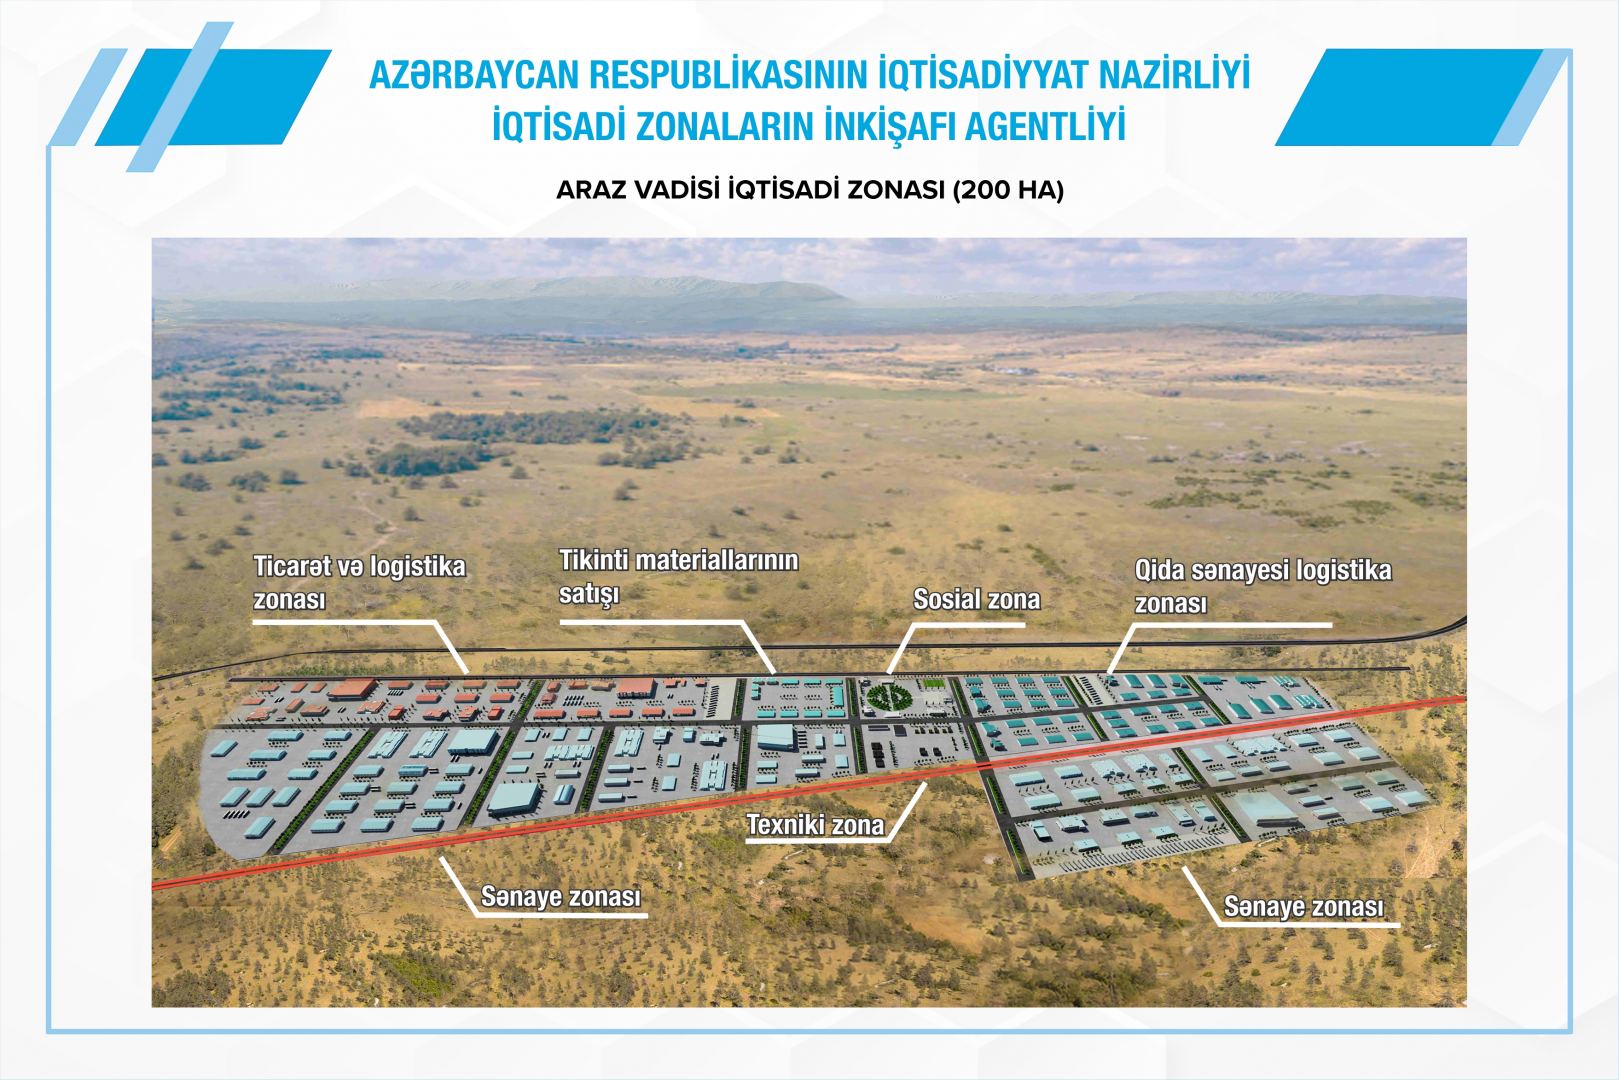 Azerbaijan clears almost half of "Araz Valley Economic Zone" Industrial Park of mines - minister